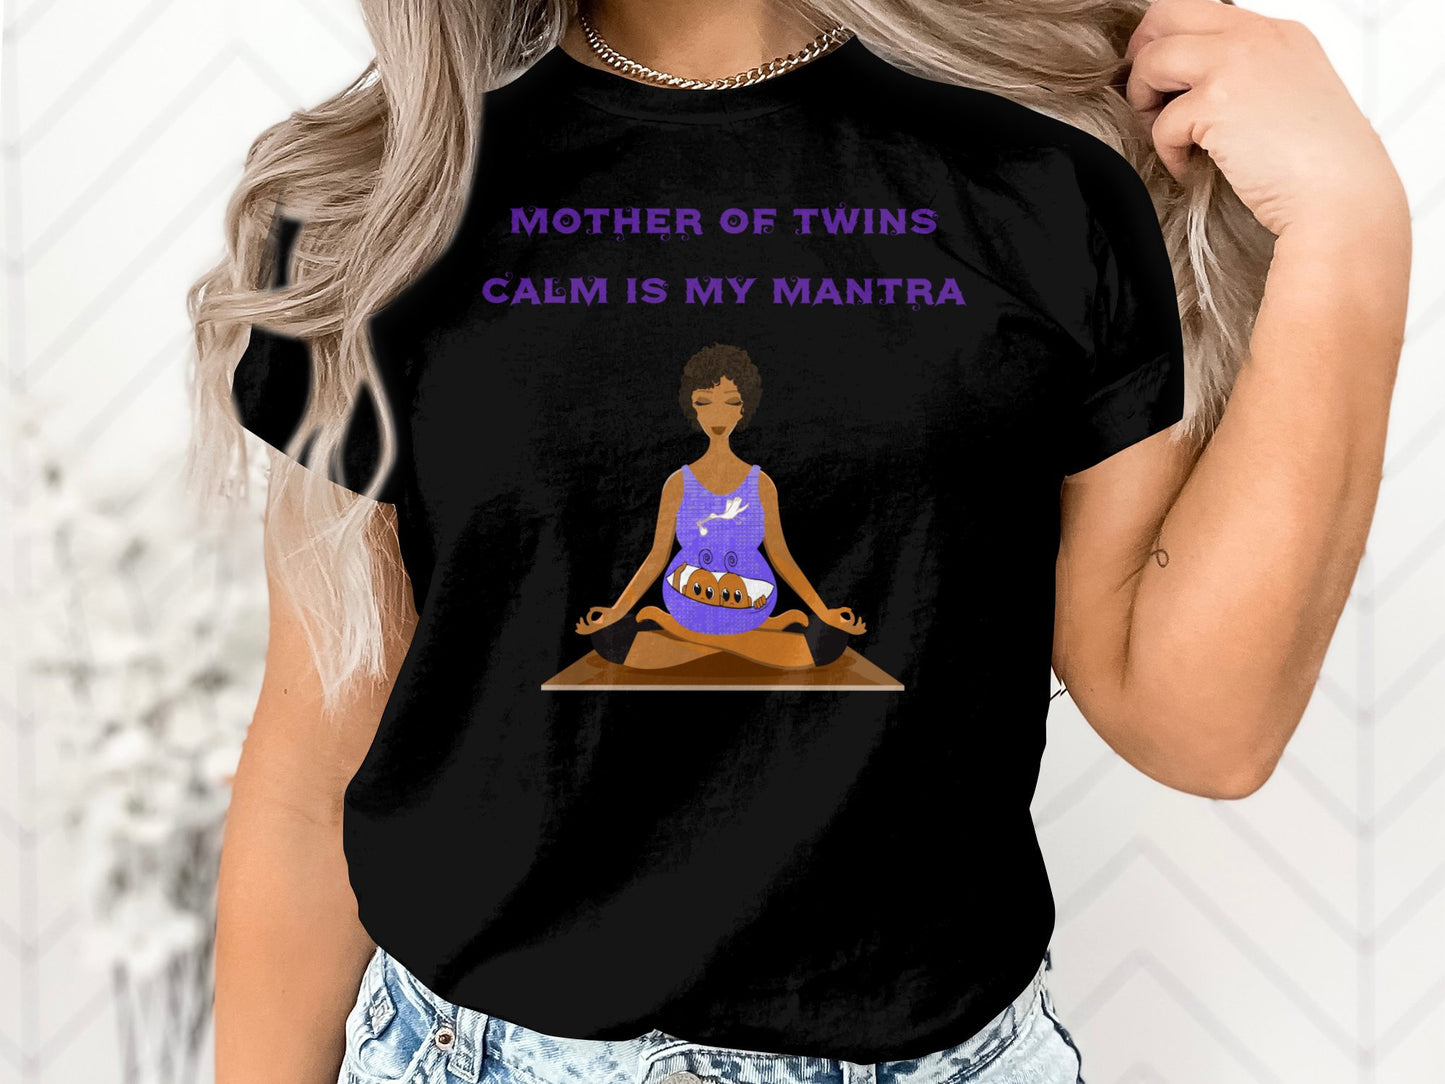 Mother of Twins, Calm Is My Mantra T-Shirt - Twin Mom's Essential, Twin Announcement, Have Twins Shirt